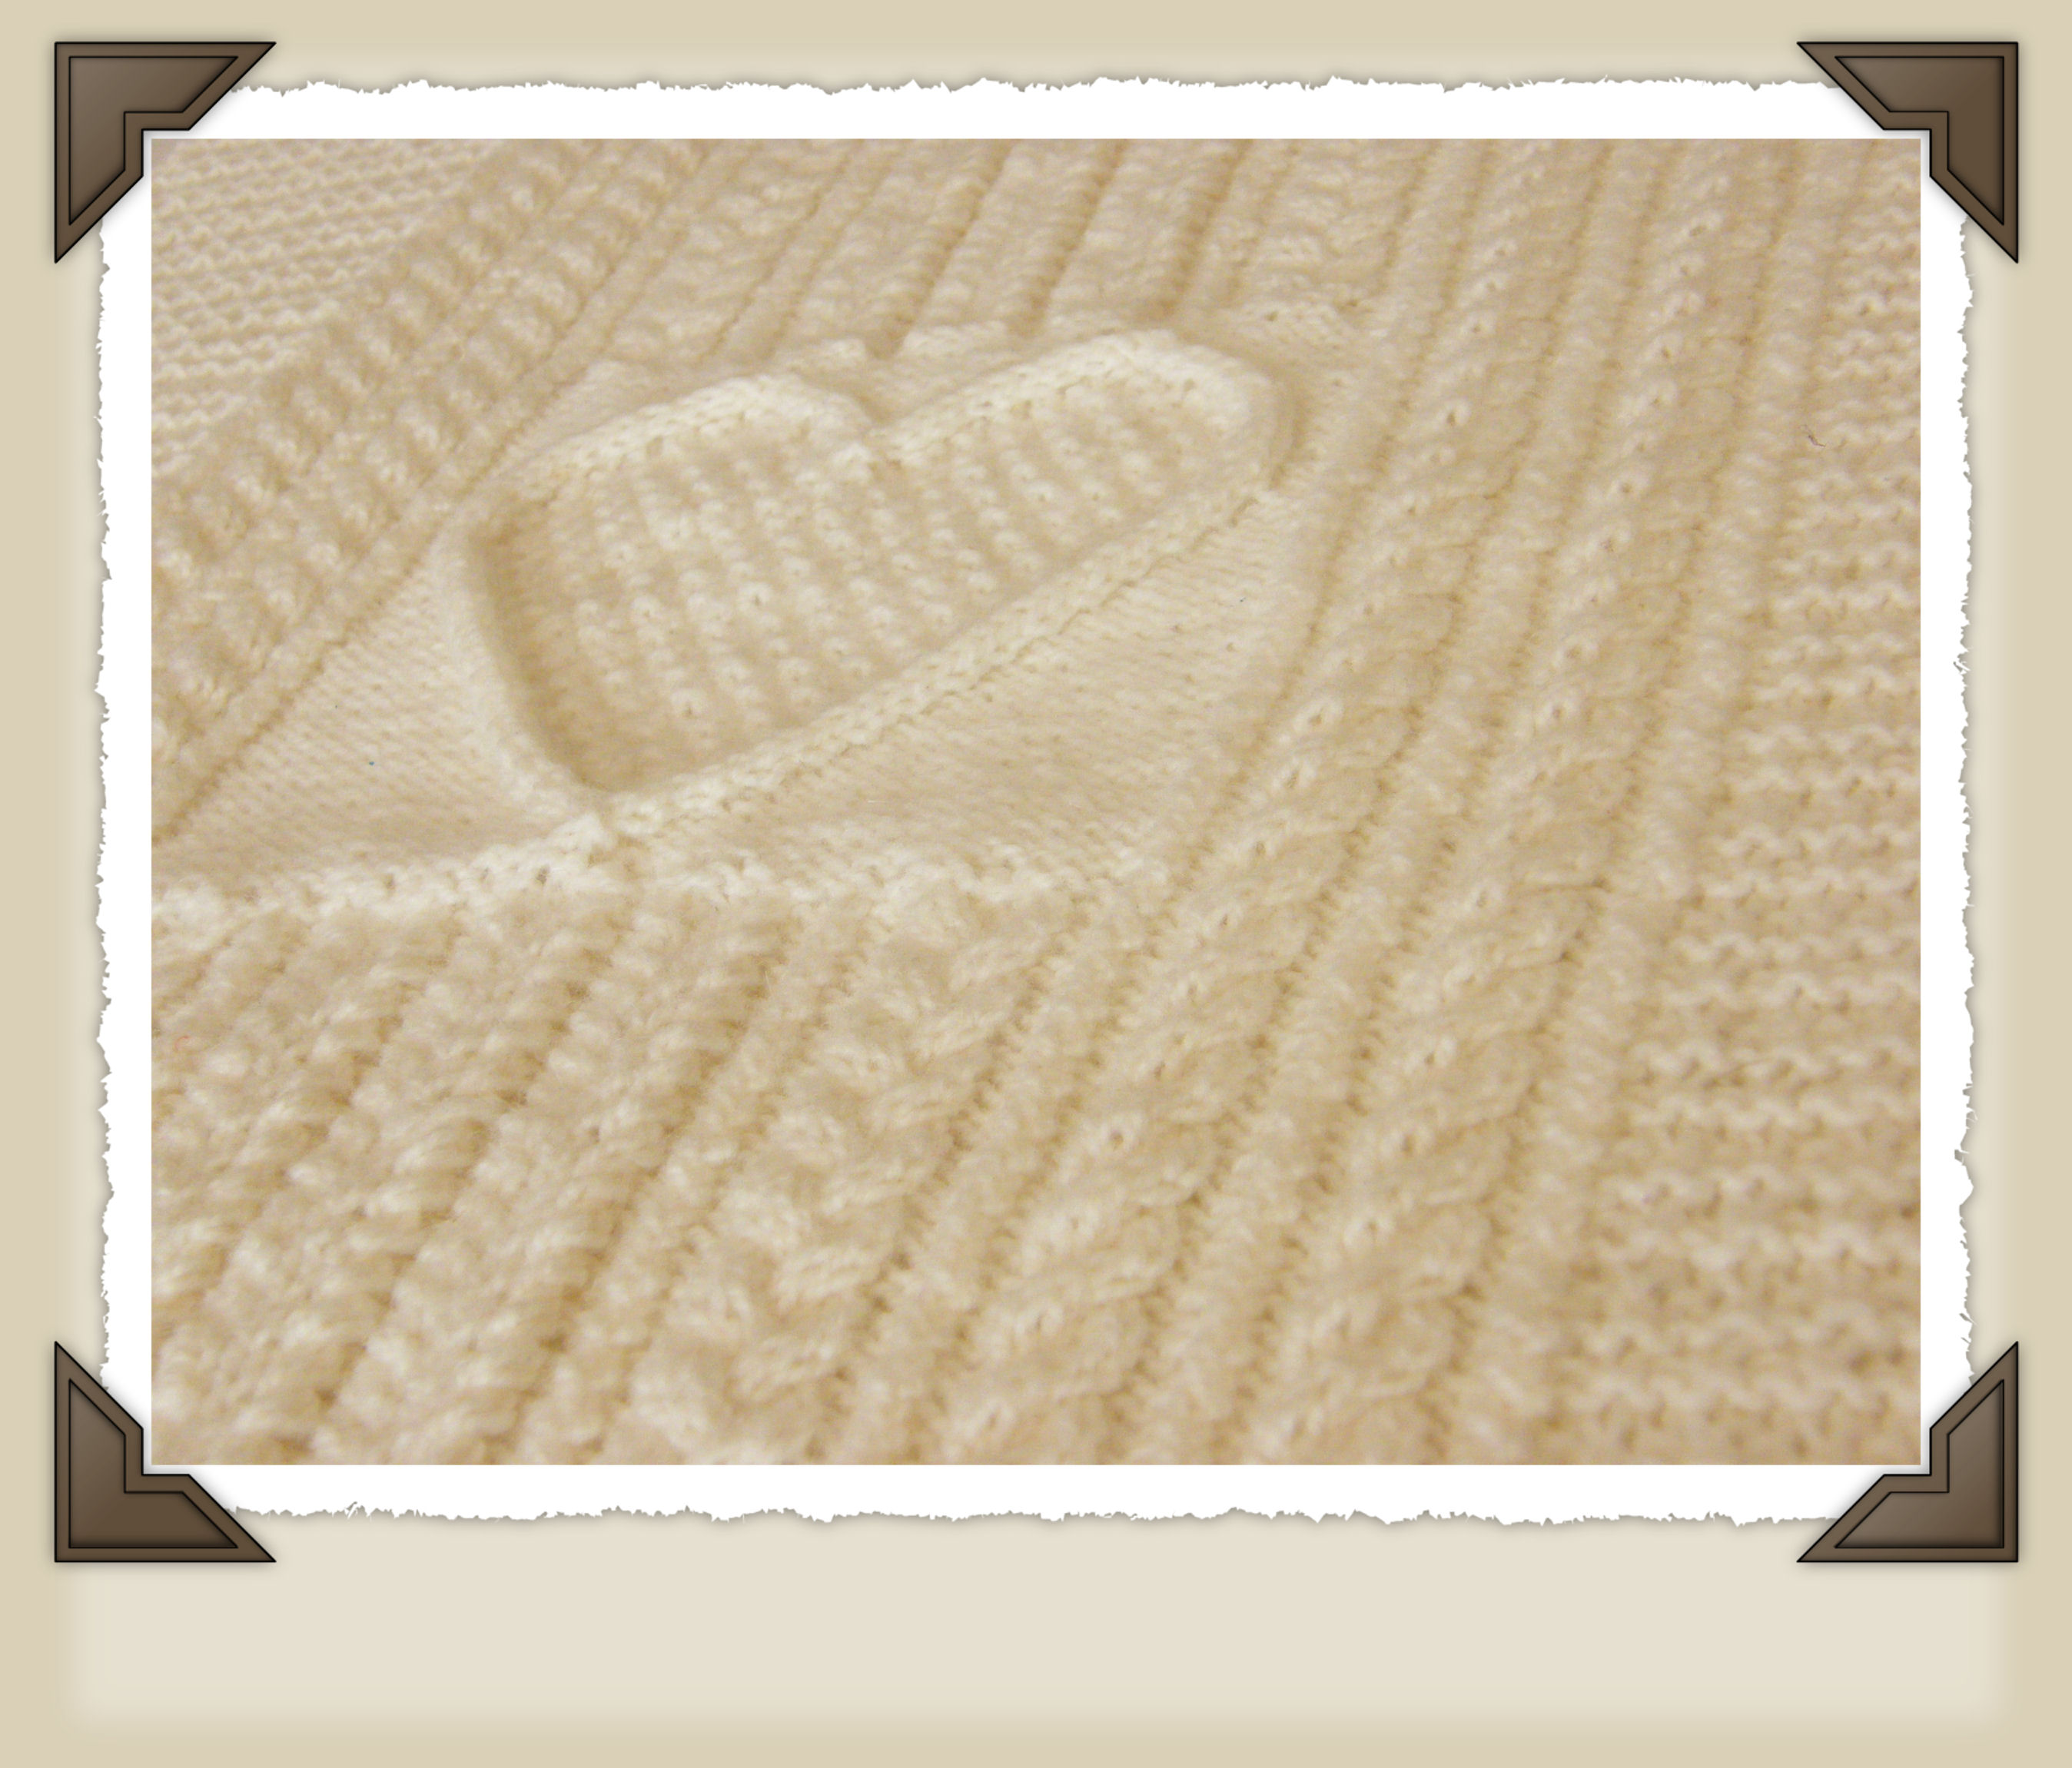 Knitting Patterns for Baby Blankets - Buz
zle